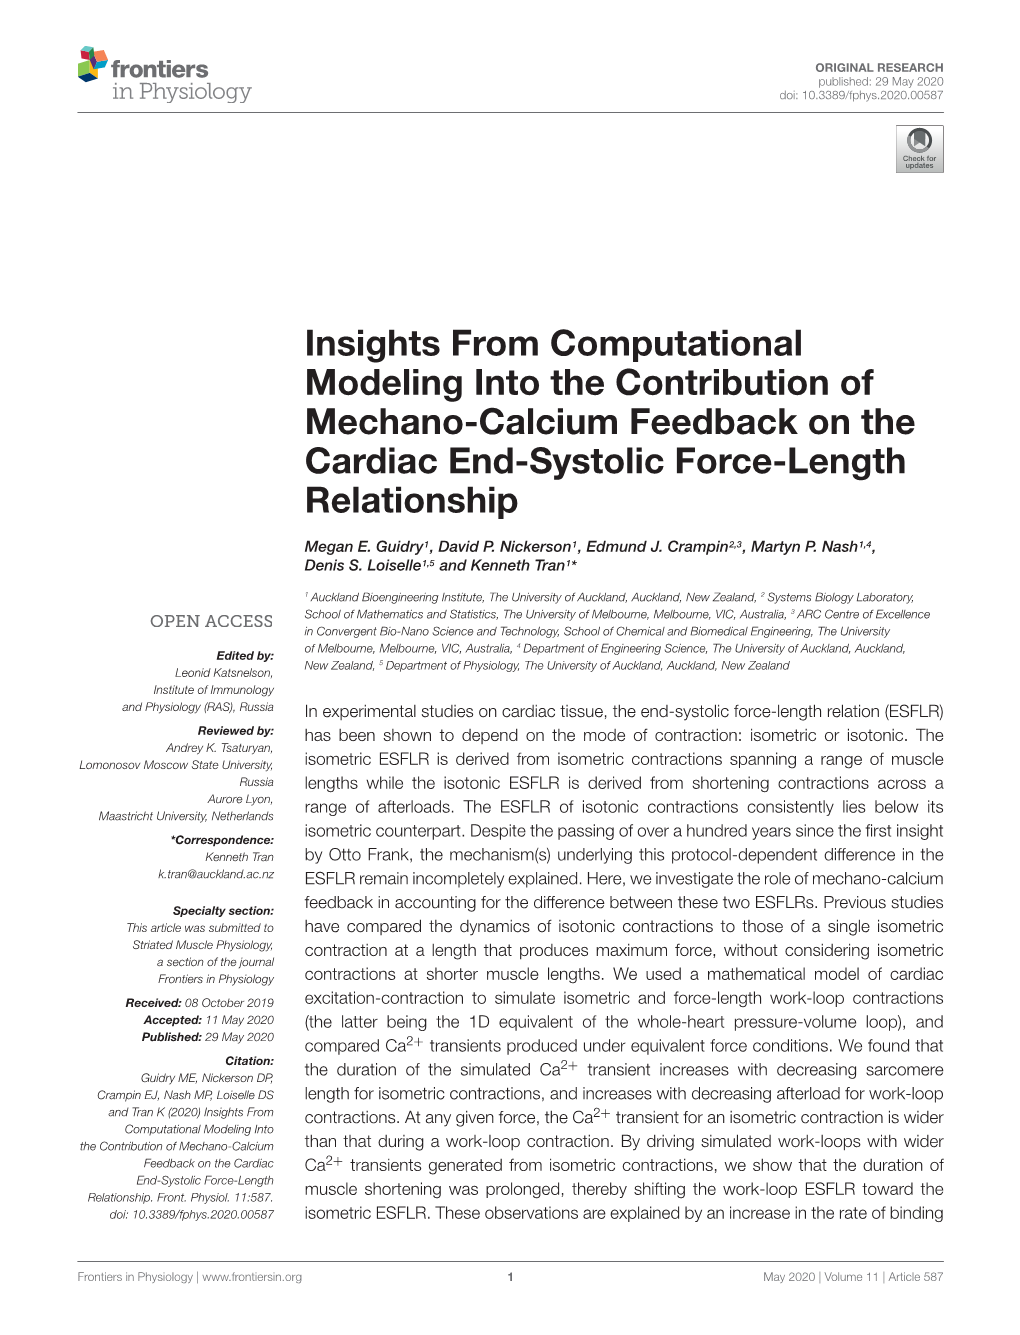 Insights from Computational Modeling Into the Contribution of Mechano-Calcium Feedback on the Cardiac End-Systolic Force-Length Relationship